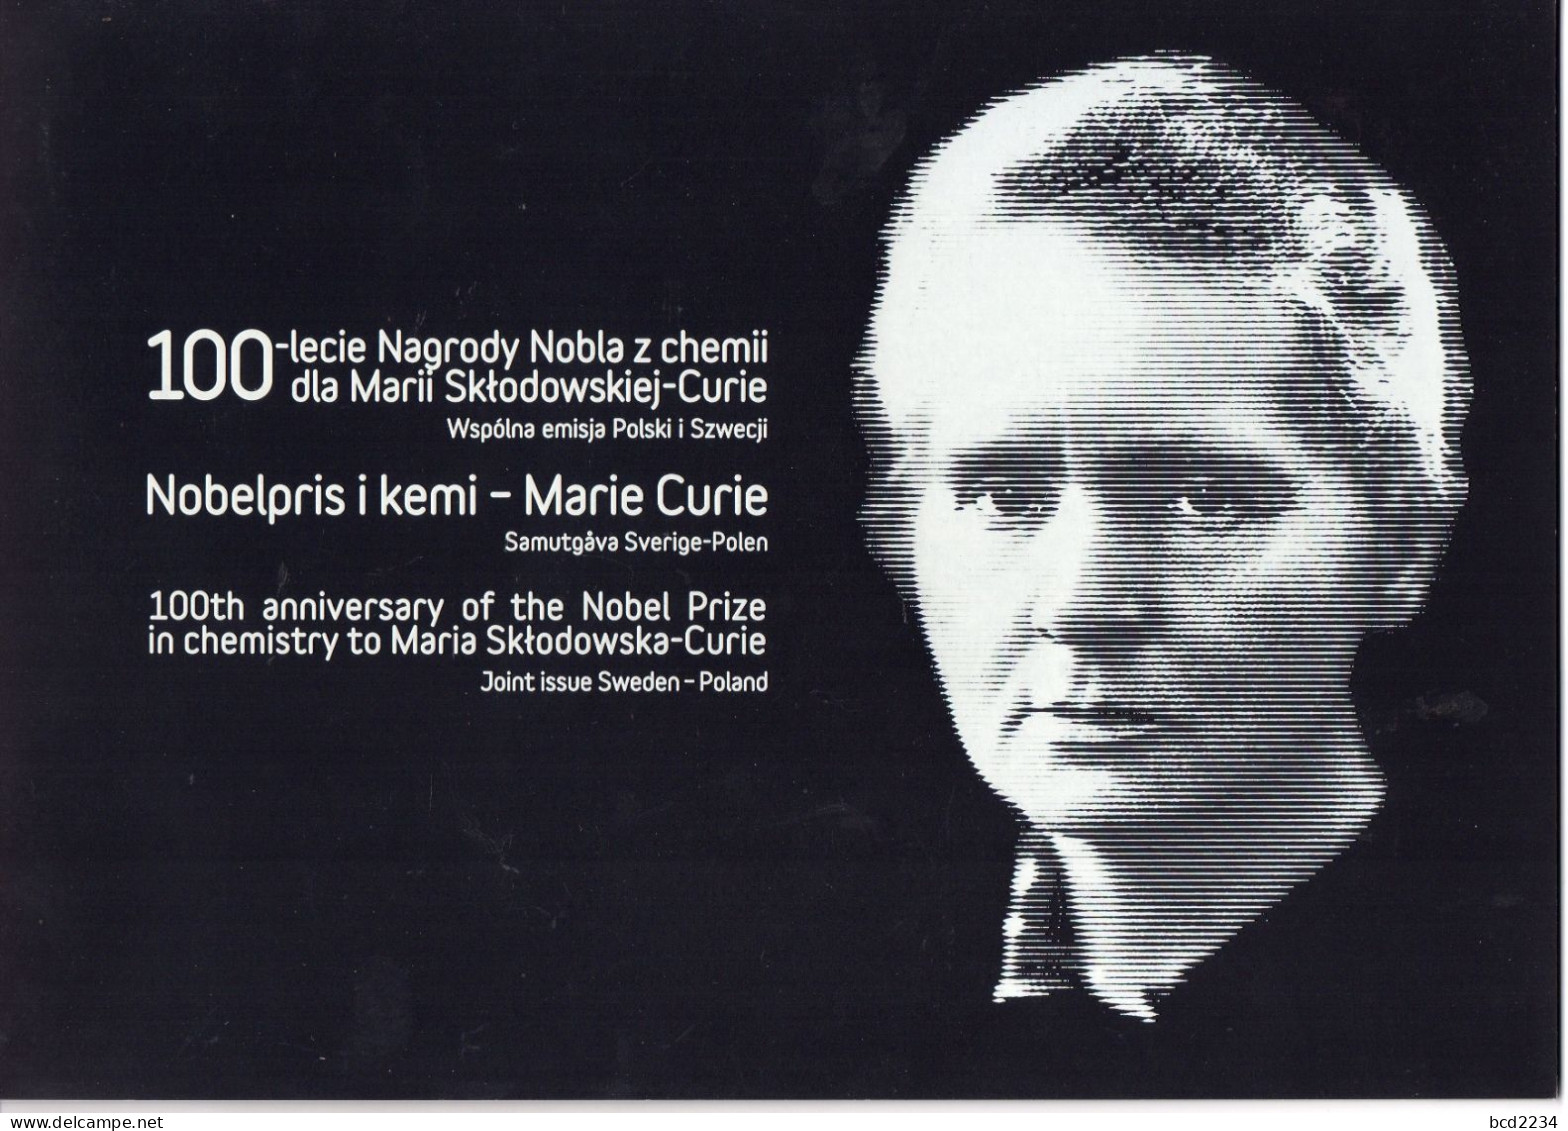 POLAND 2011 LIMITED EDITION: RARE 100TH ANNIVERSARY MARIE CURIE NOBEL PRIZE CHEMISTRY FOLDER FDC MS PL SWEDEN - Scheikunde